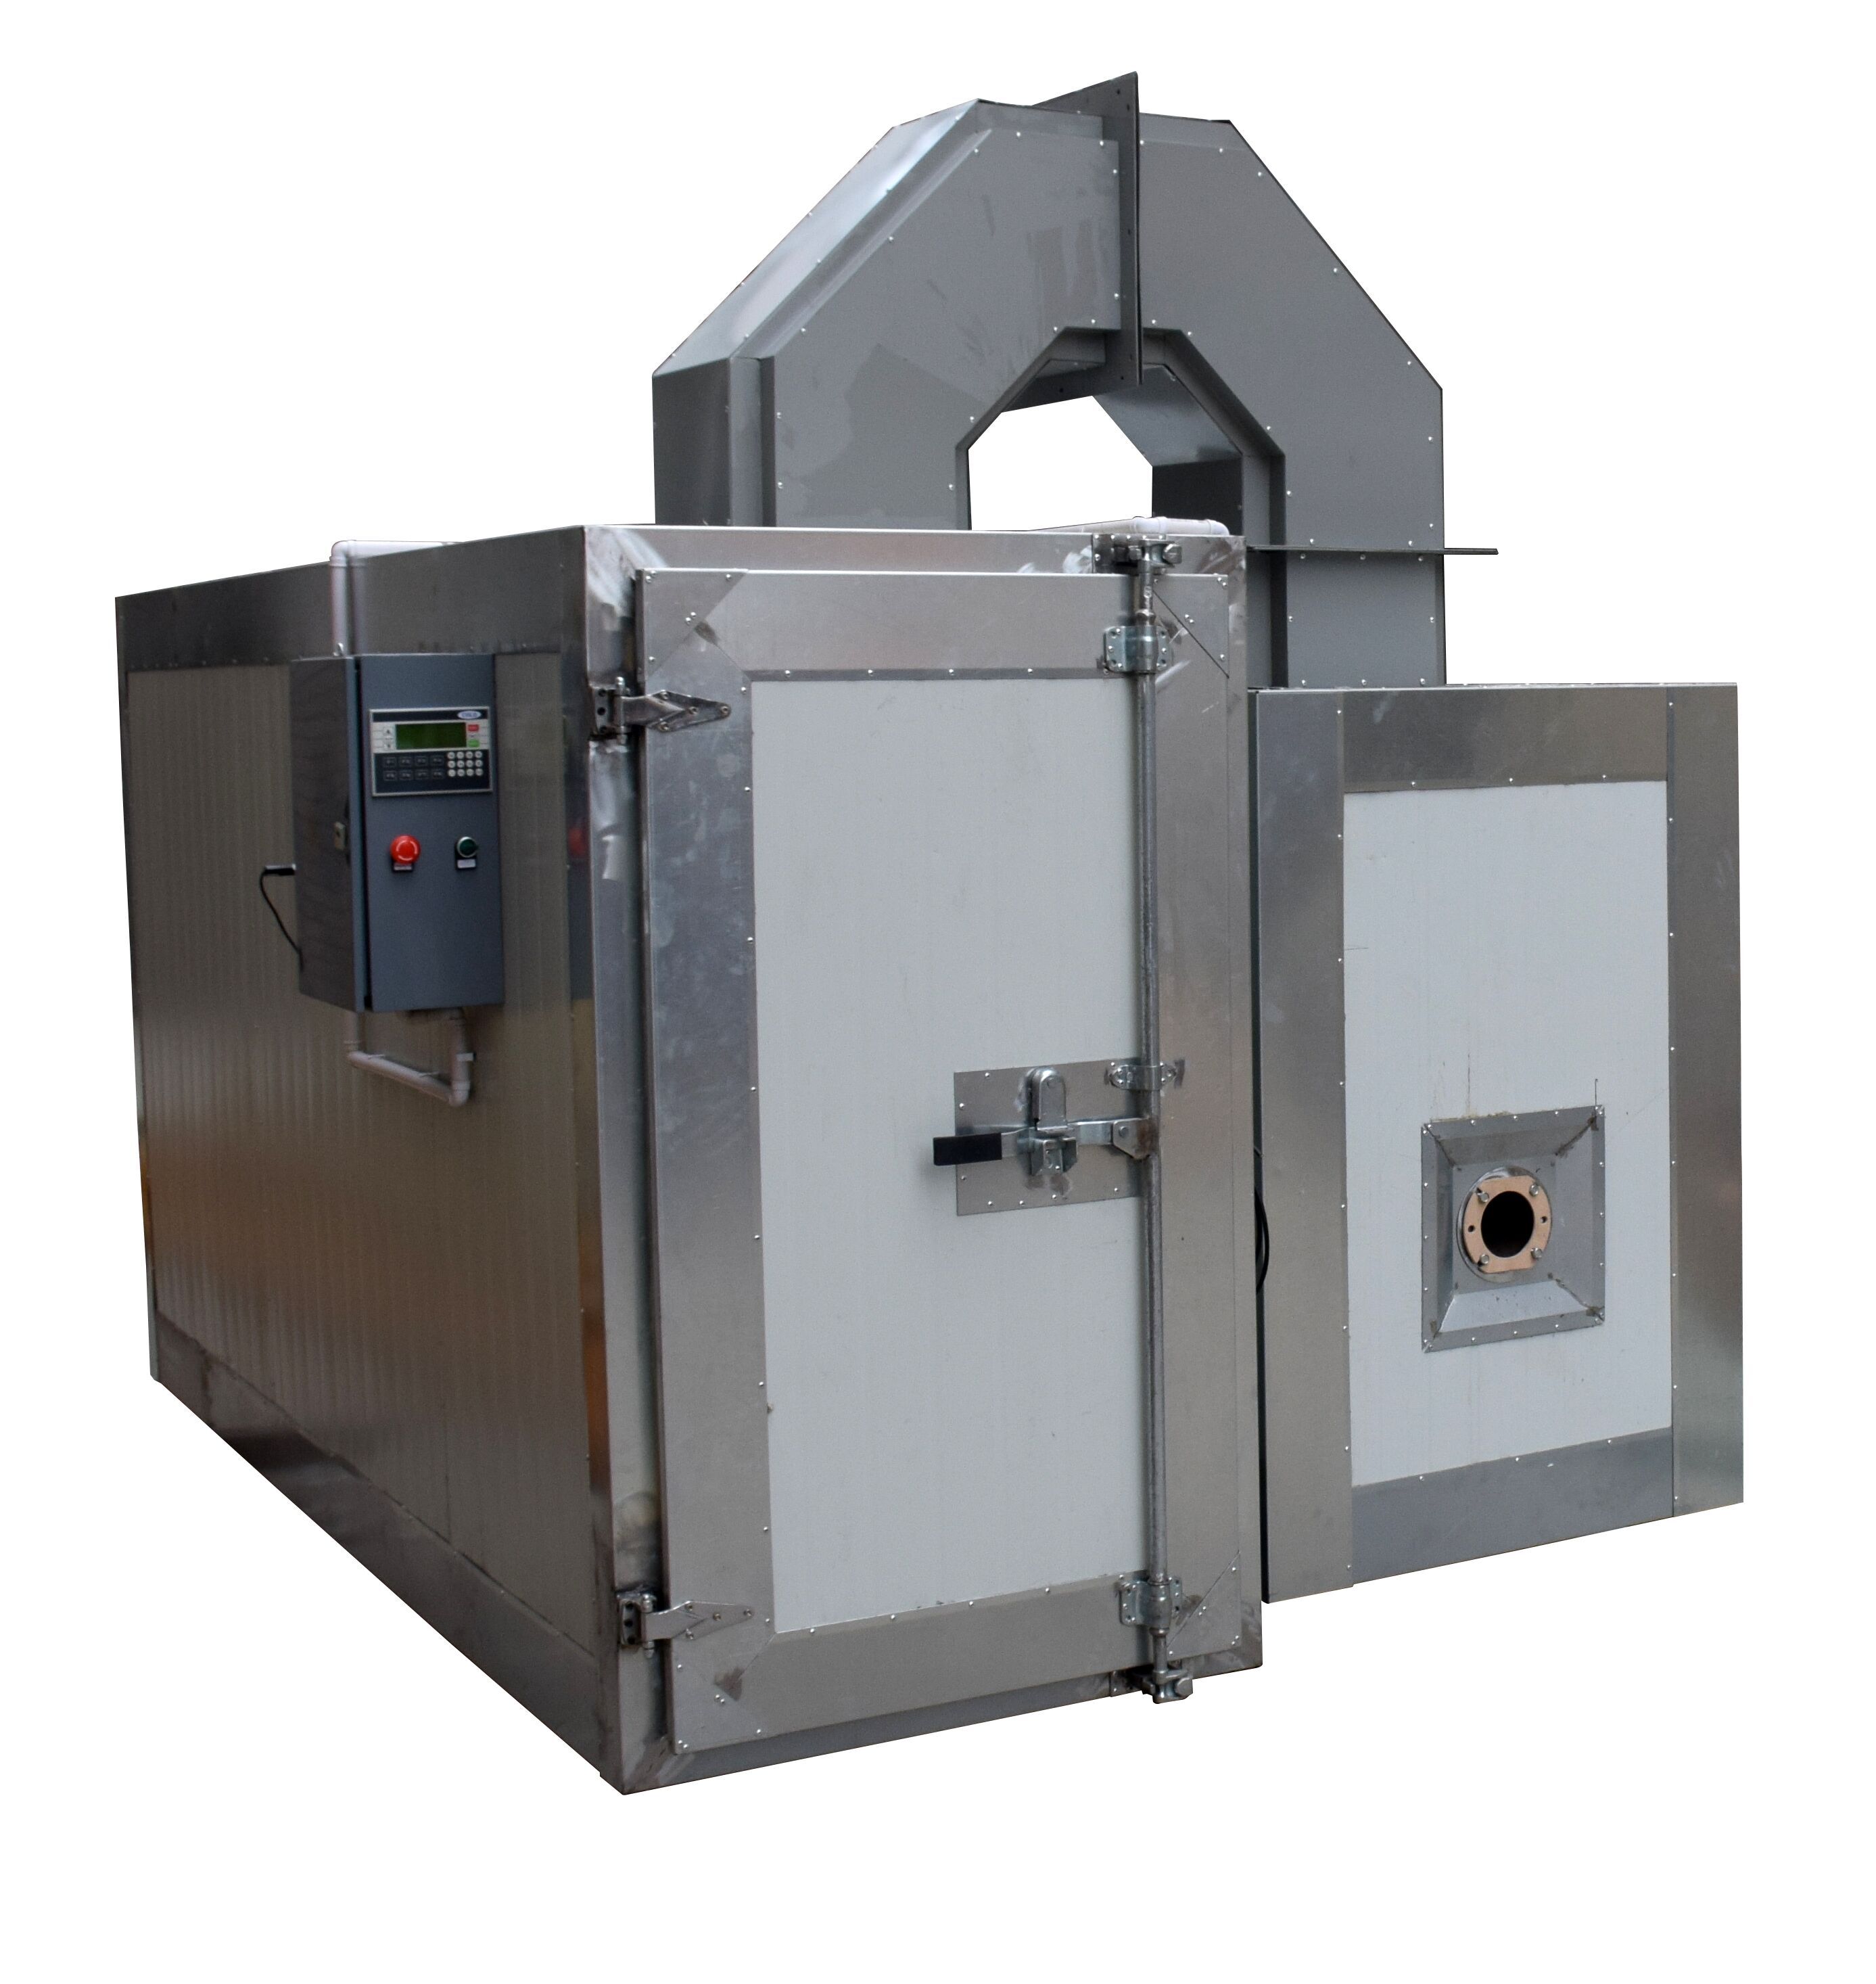 Small Powder Coating Oven Gas Curing Oven COLO-0813